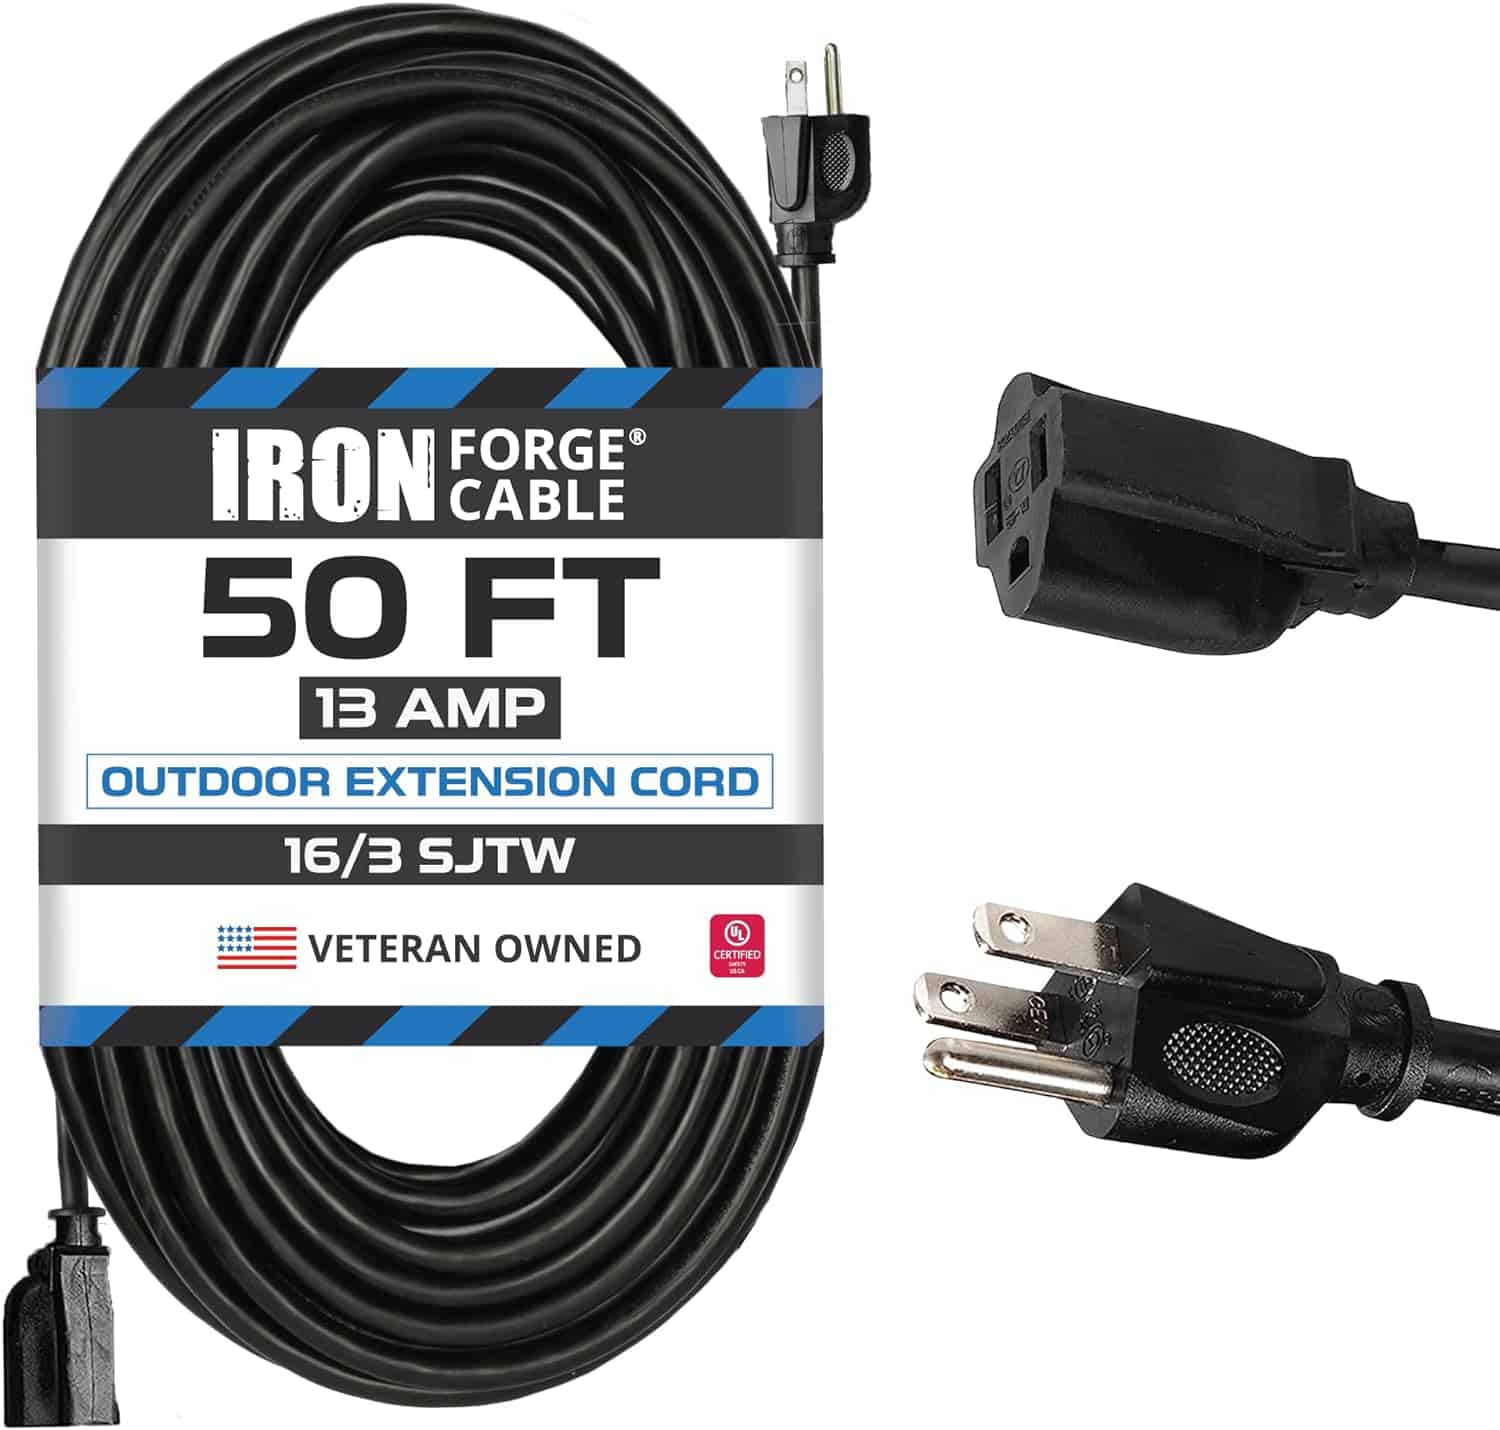 Iron Forge 50 Ft Extension Cord 16 3 Black 50 Foot Extension Cord Indoor Outdoor Use 3 Prong Weatherproof Exterior Extension Cord Great for Garden 1